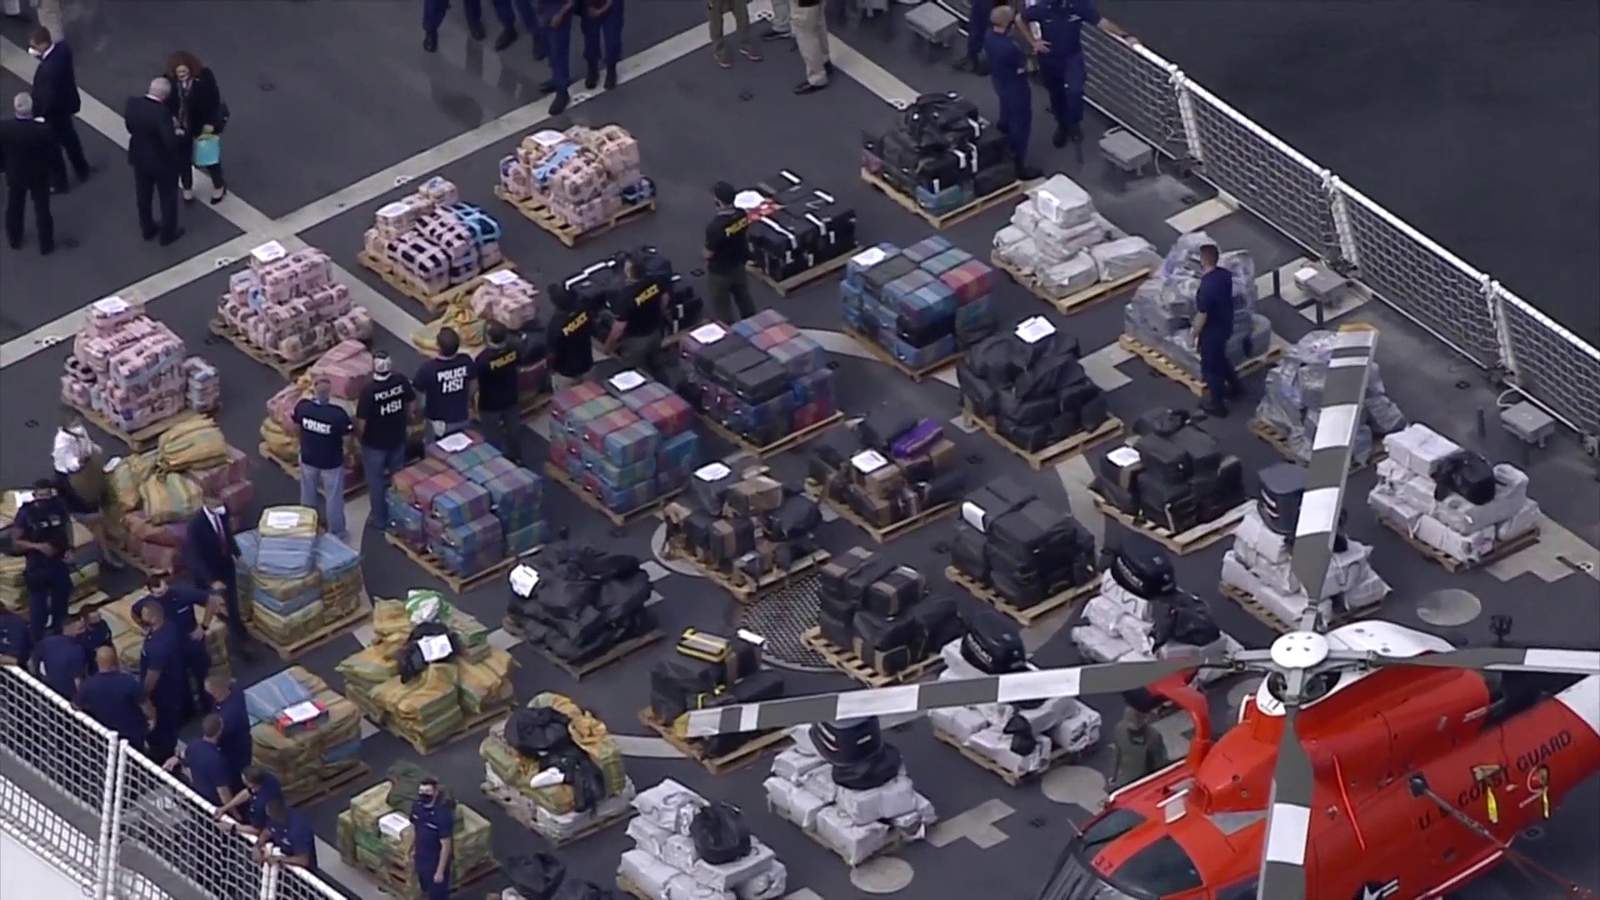 Coast Guard offloads about 30,000 pounds of drugs at Port Everglades